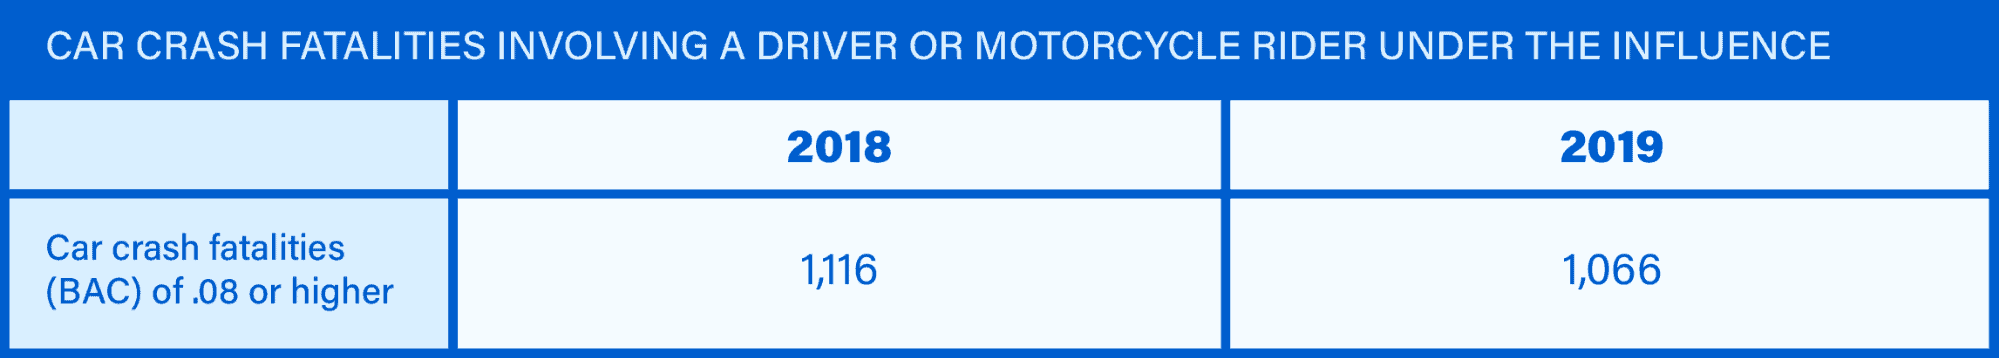 Car Crash Fatalities Involving A Driver Or Motorcycle Rider Under The Influence